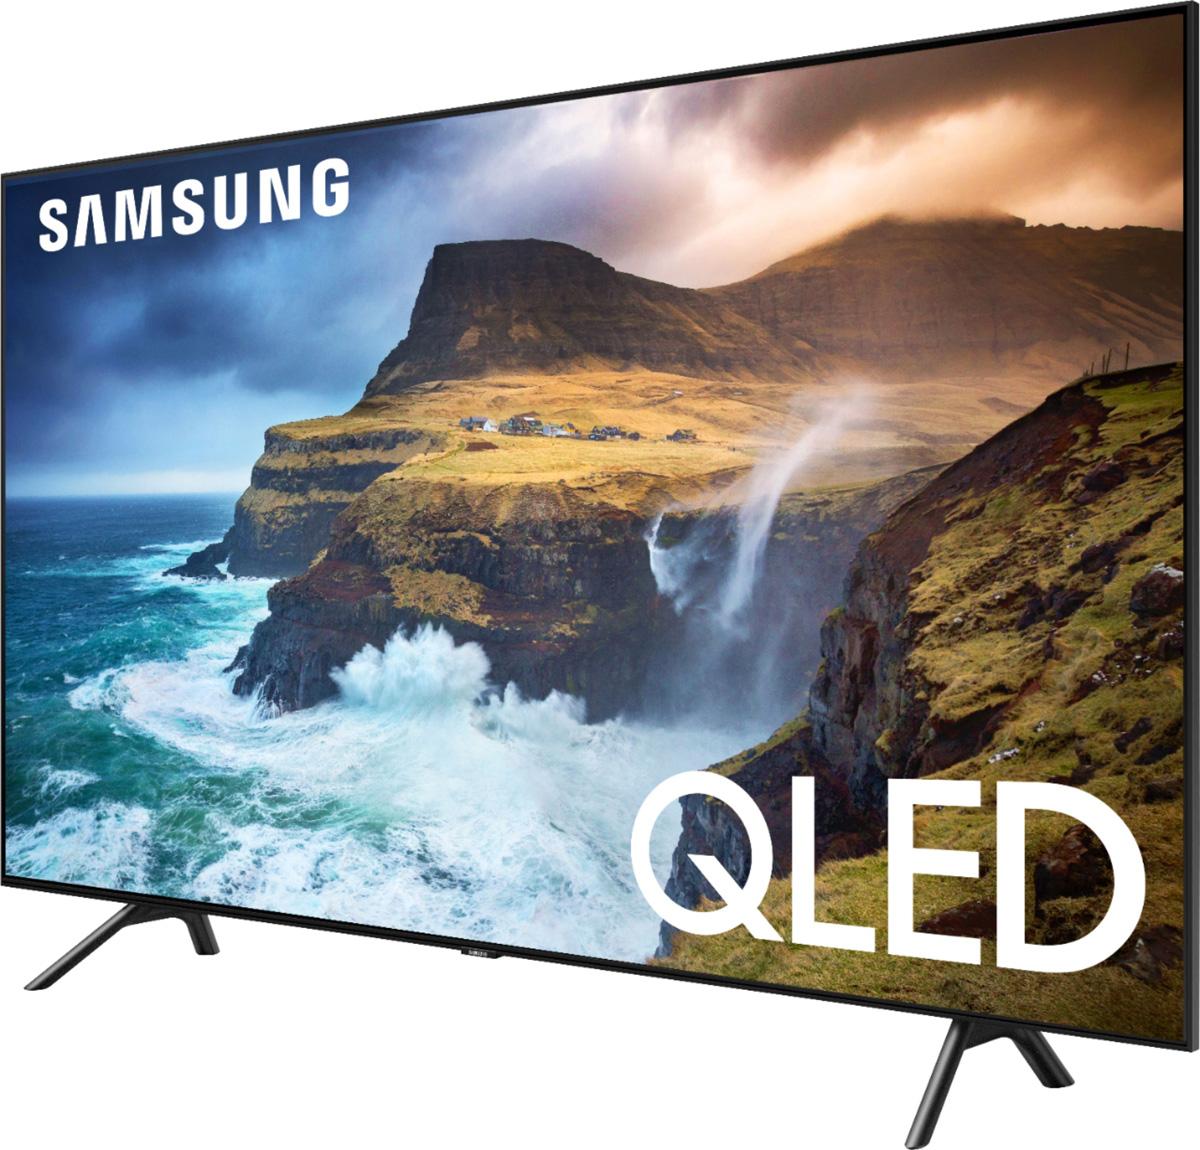 75in Samsung Q70T Series 4K UHD Smart QLED TV for $1397.99 Shipped